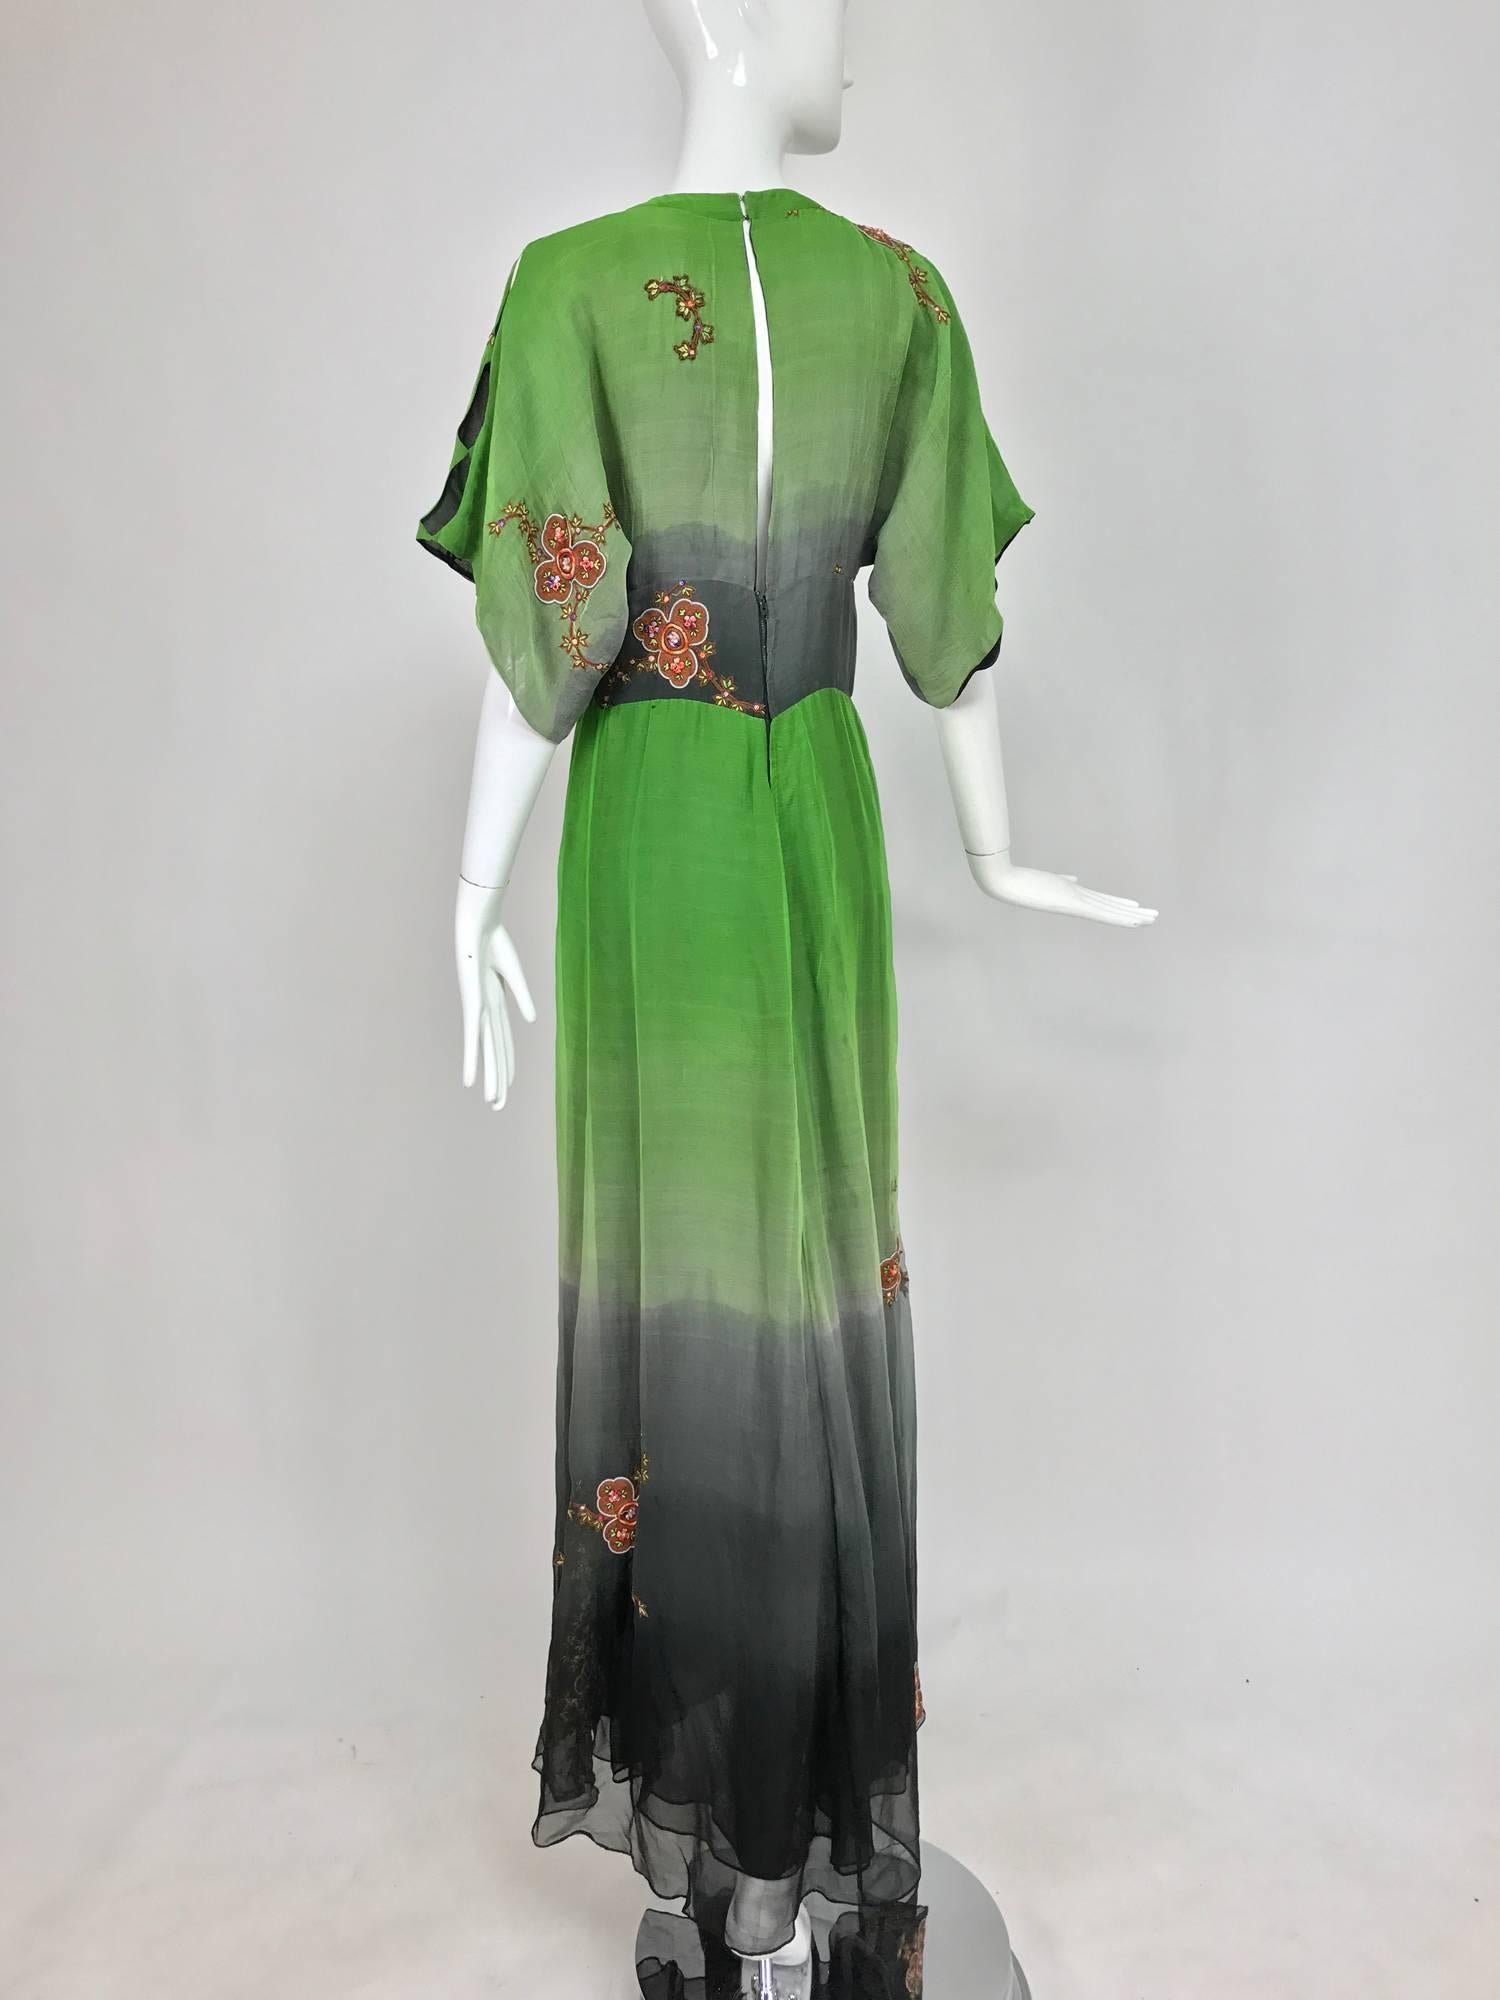 Women's Thea Porter Couture ombred silk chiffon plunge gown with appliques 1970s